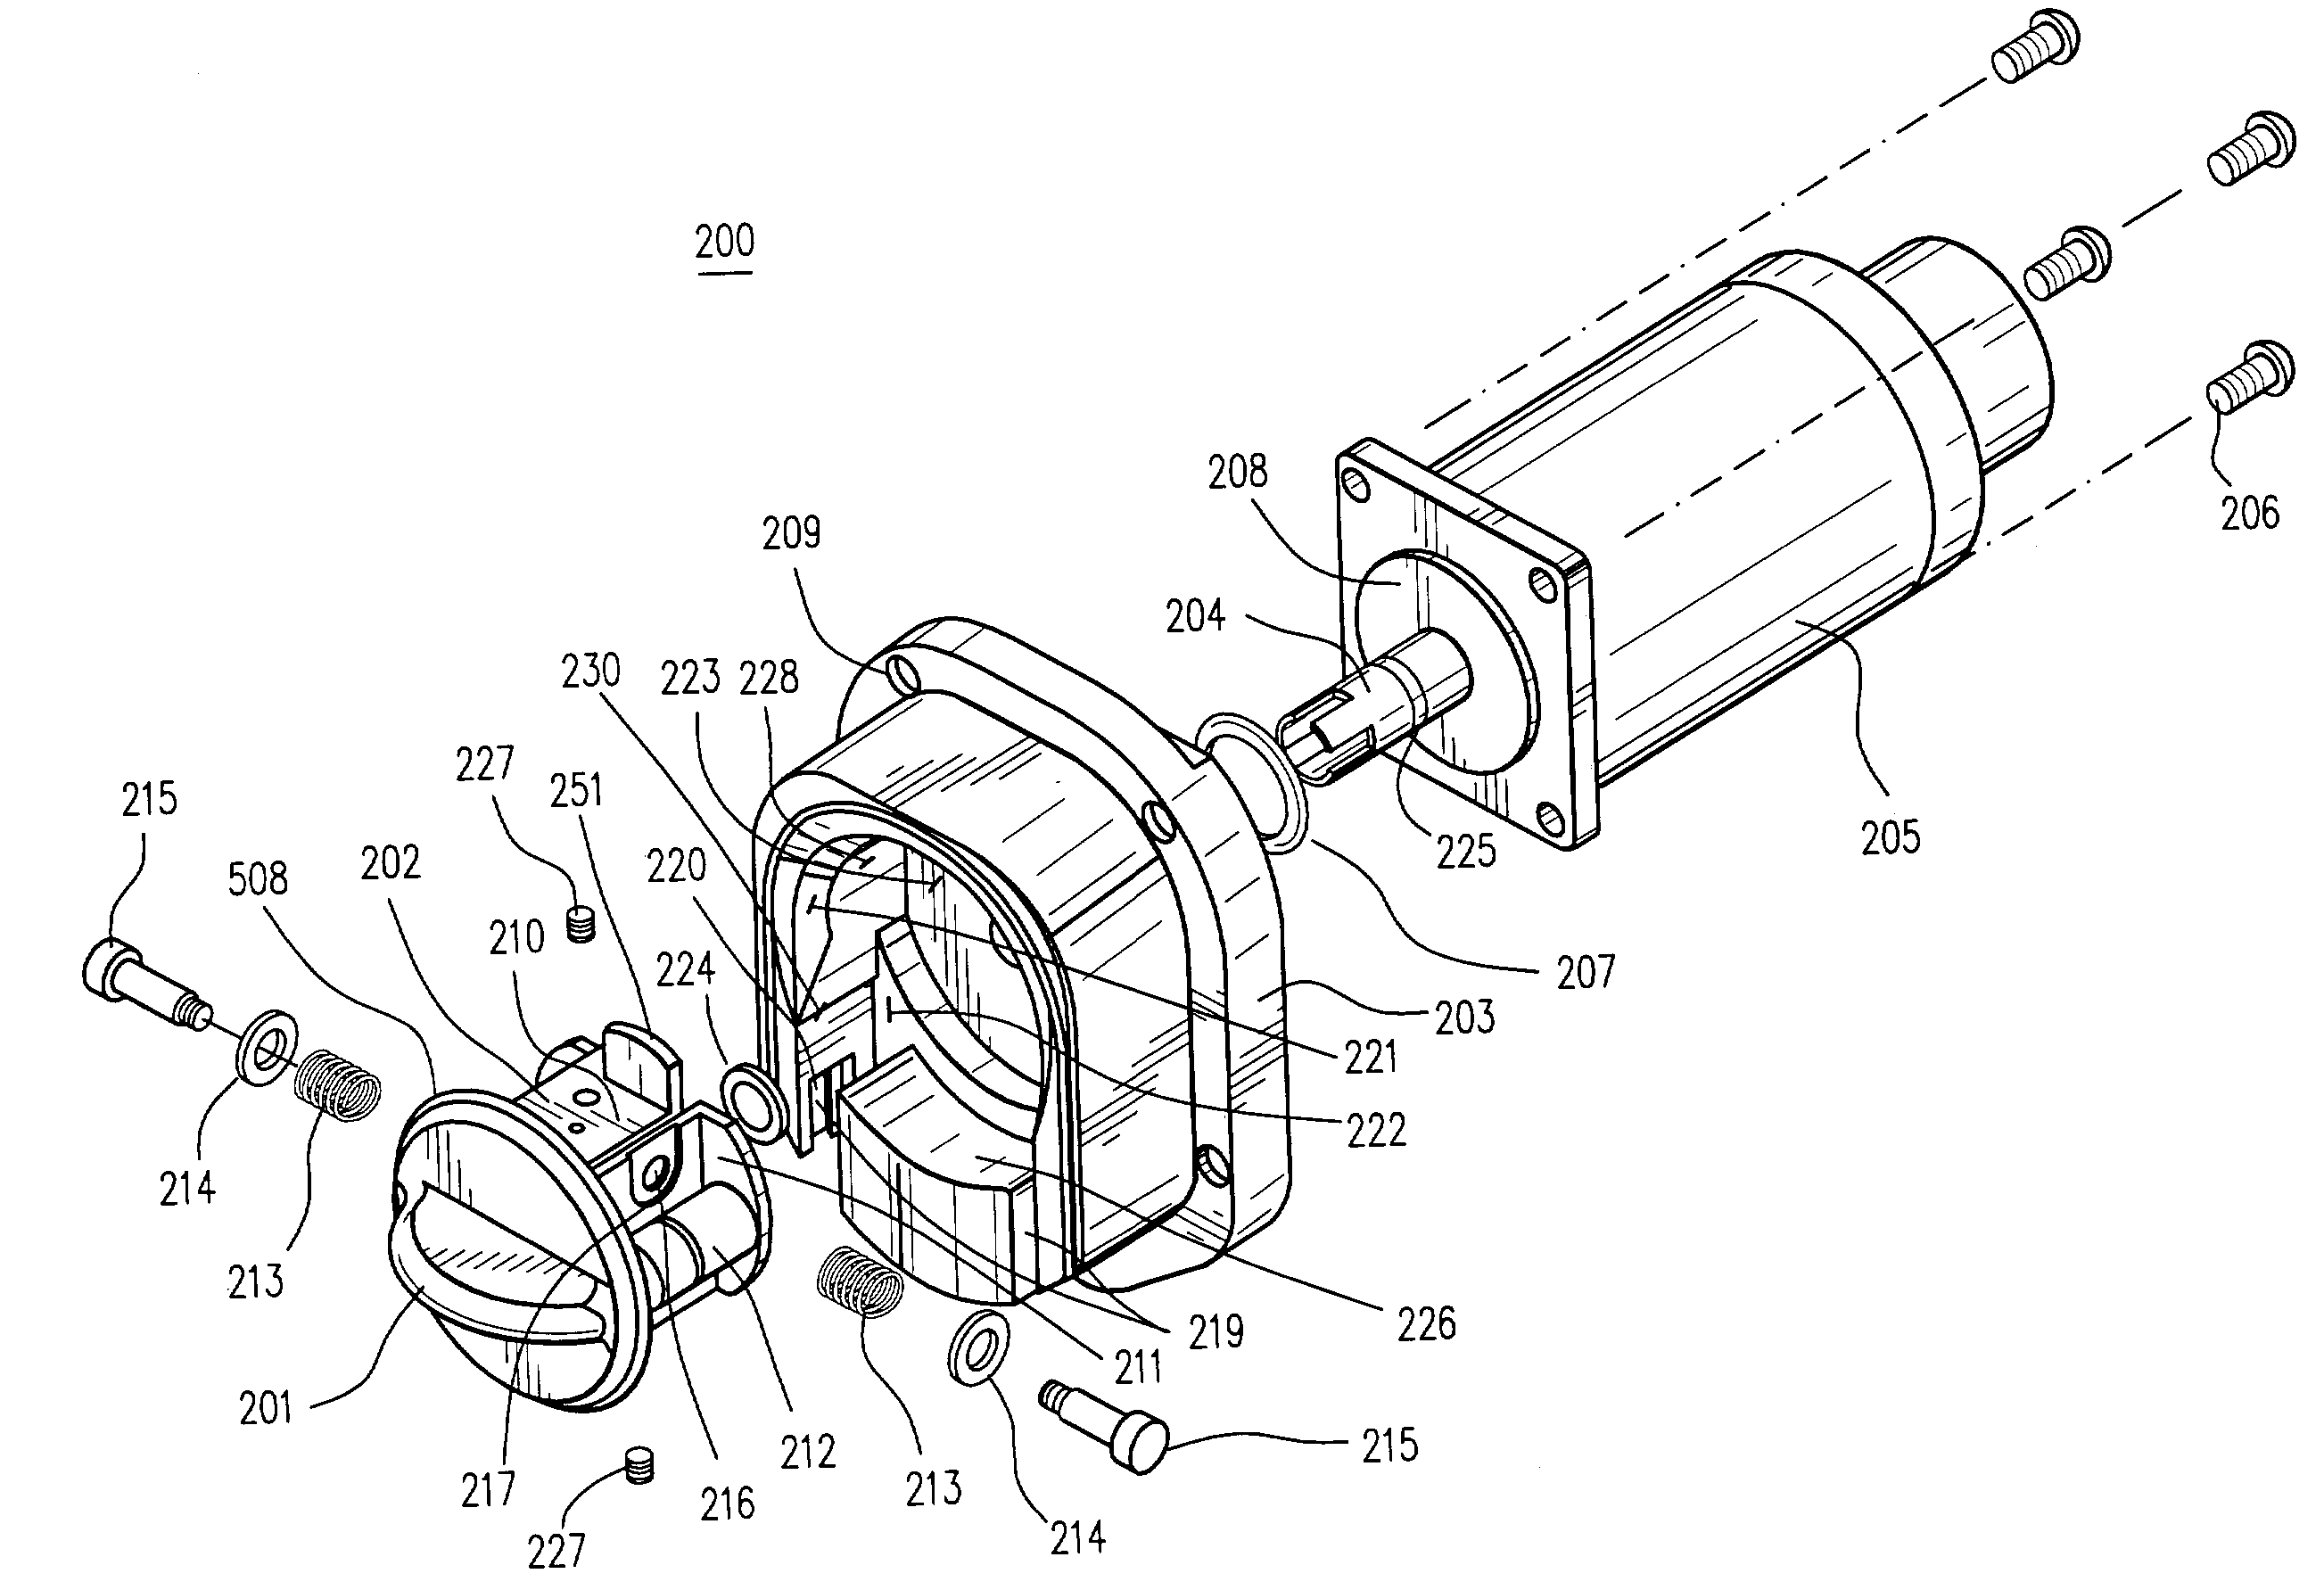 Self-loading peristaltic pump for extracorporeal blood circuit